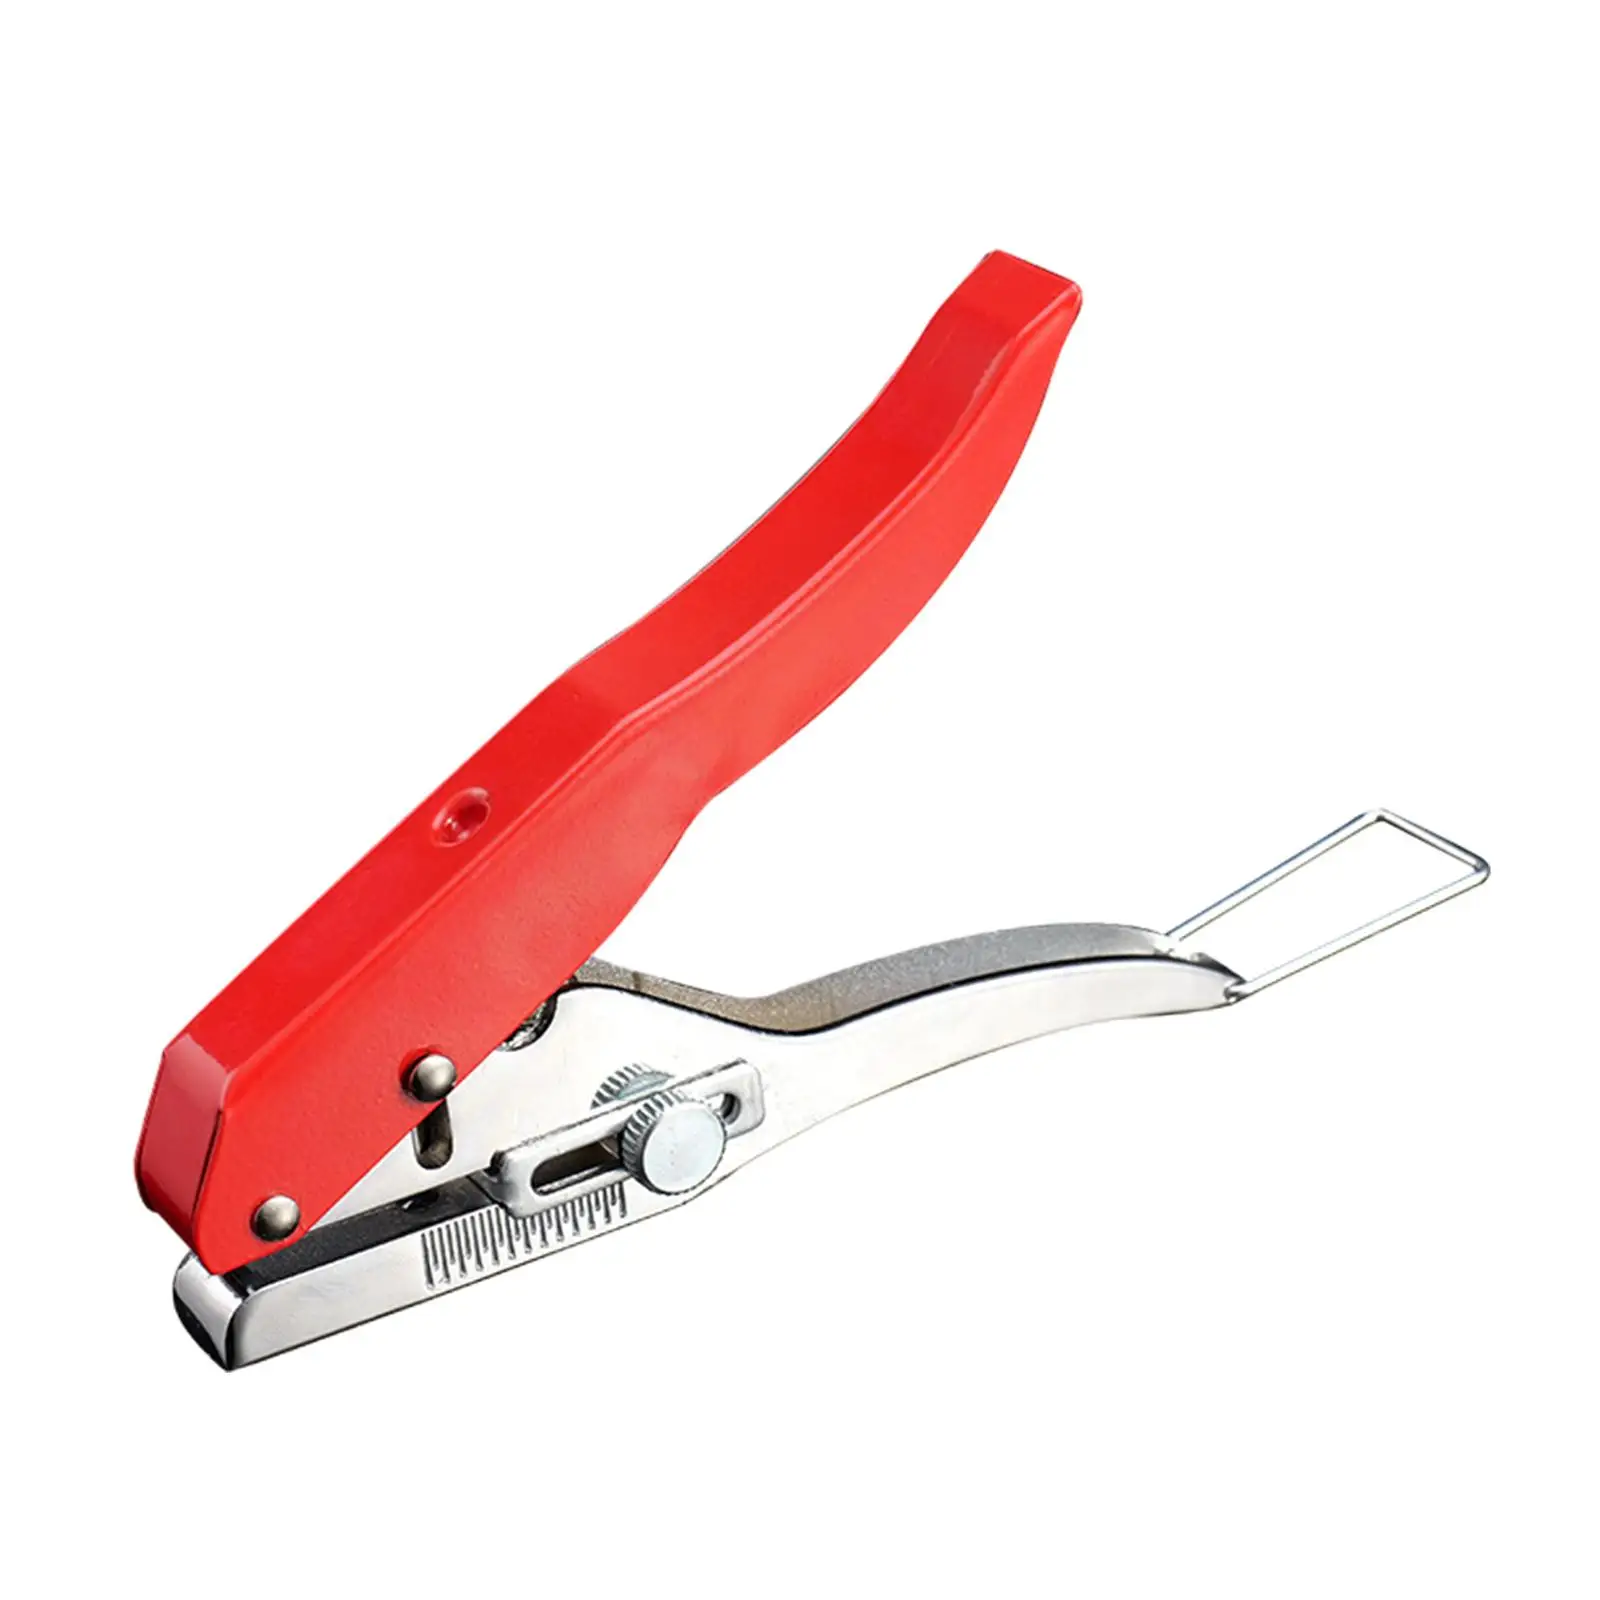 Hole Punch Round Puncher Pliers Heavy Duty Handheld Edge Banding Punching Pliers for Hard Film PVC Card DIY Craft Art Project